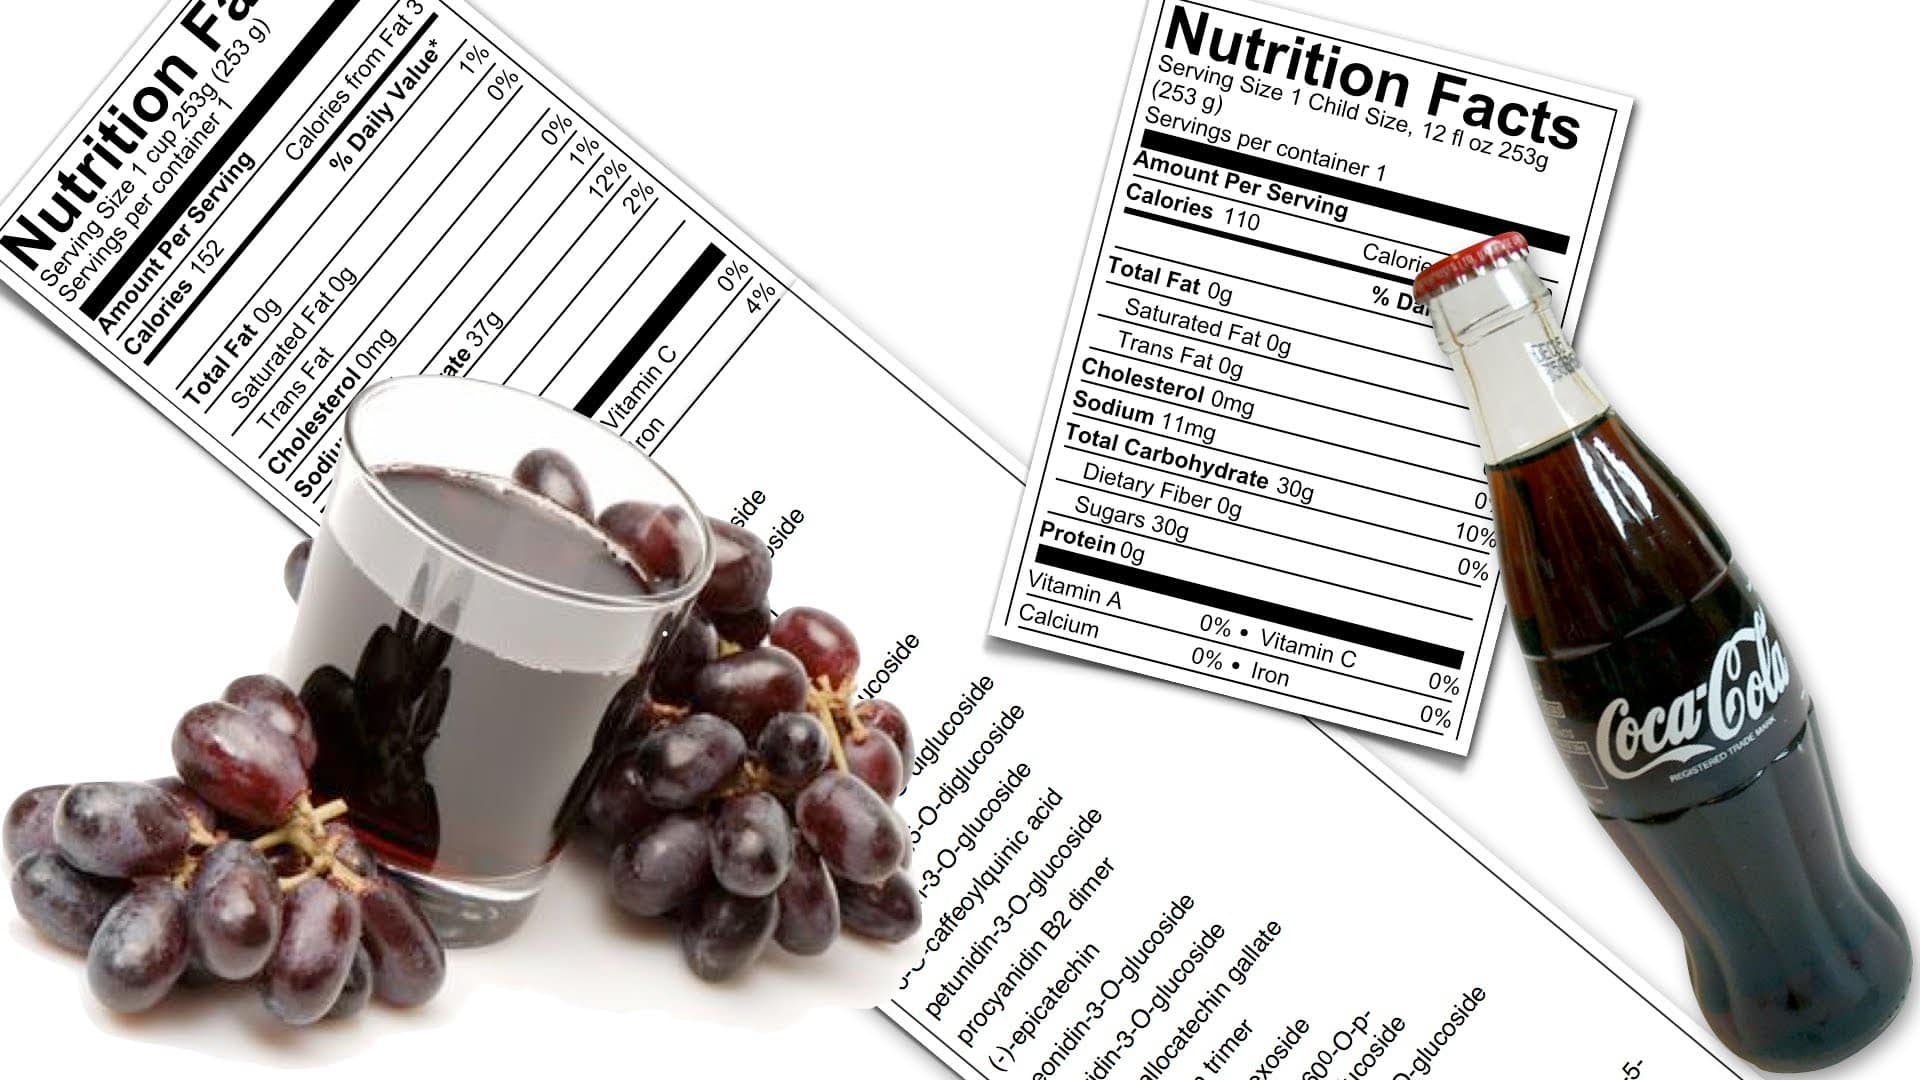 Phytochemicals- The nutrition facts missing from the label